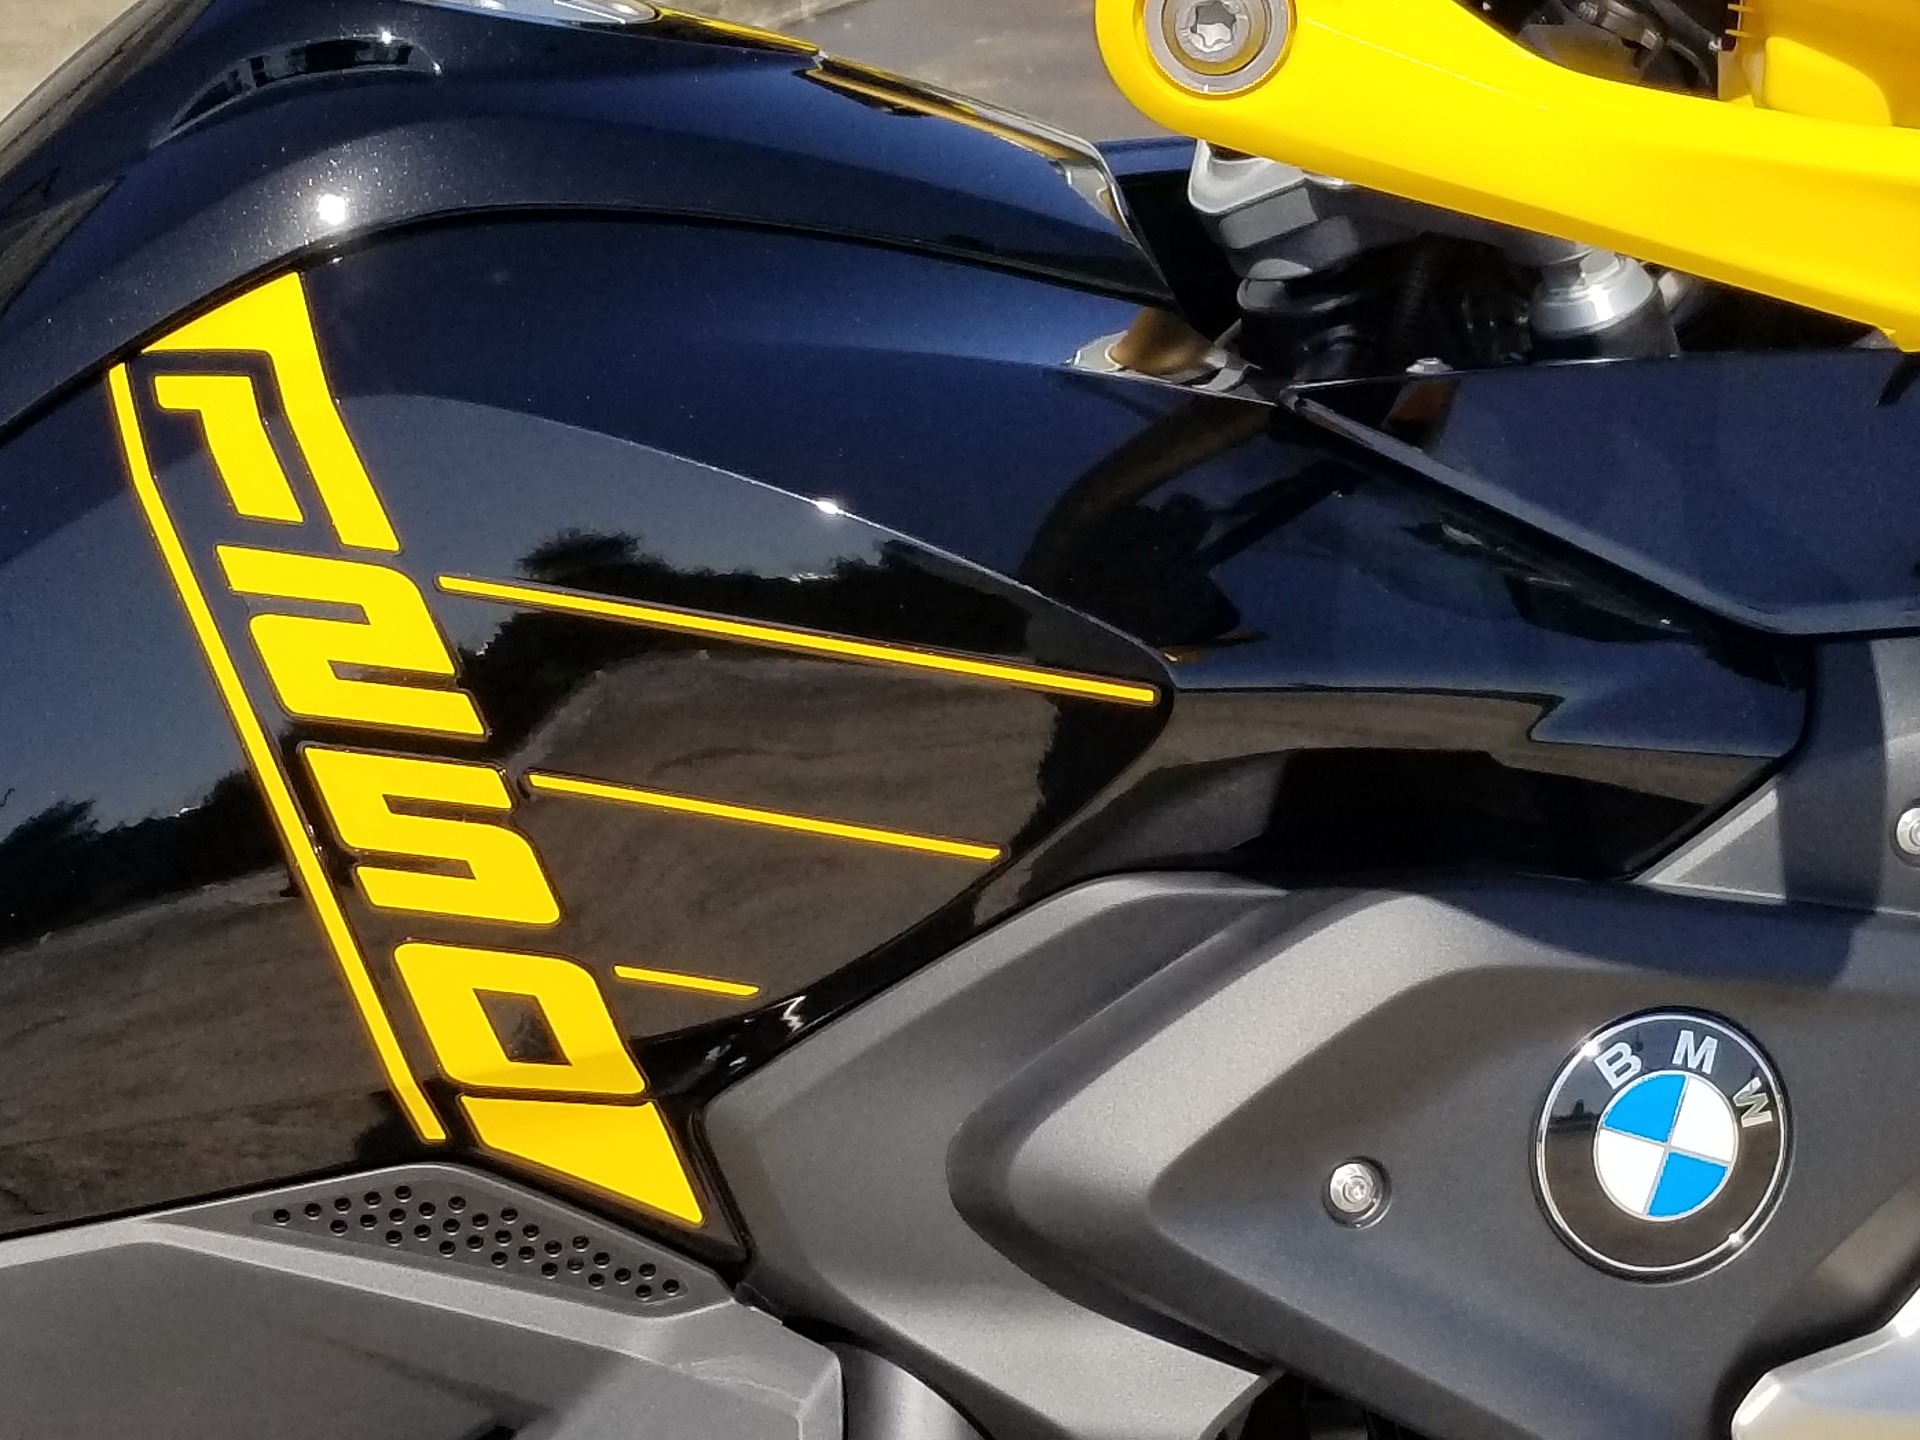 2022 BMW R 1250 GS - 40 Years of GS Edition in Aurora, Ohio - Photo 5